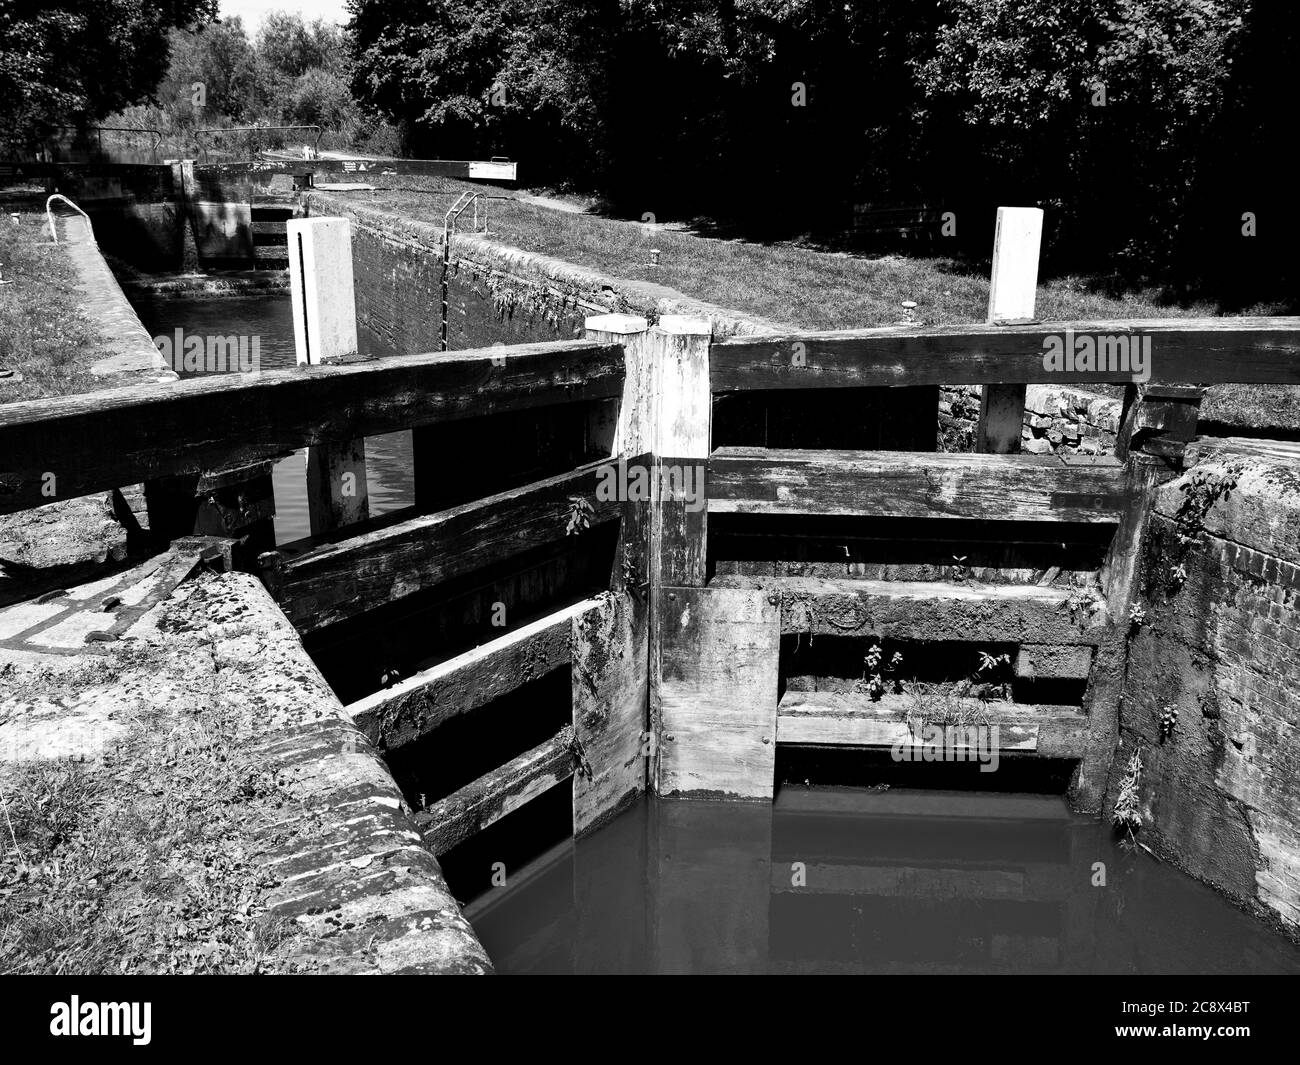 Black and White Landscape, Brusden Lock, Kennett and Avon Canal, Kintbury, Berkshire, Angleterre, Royaume-Uni, GB. Banque D'Images